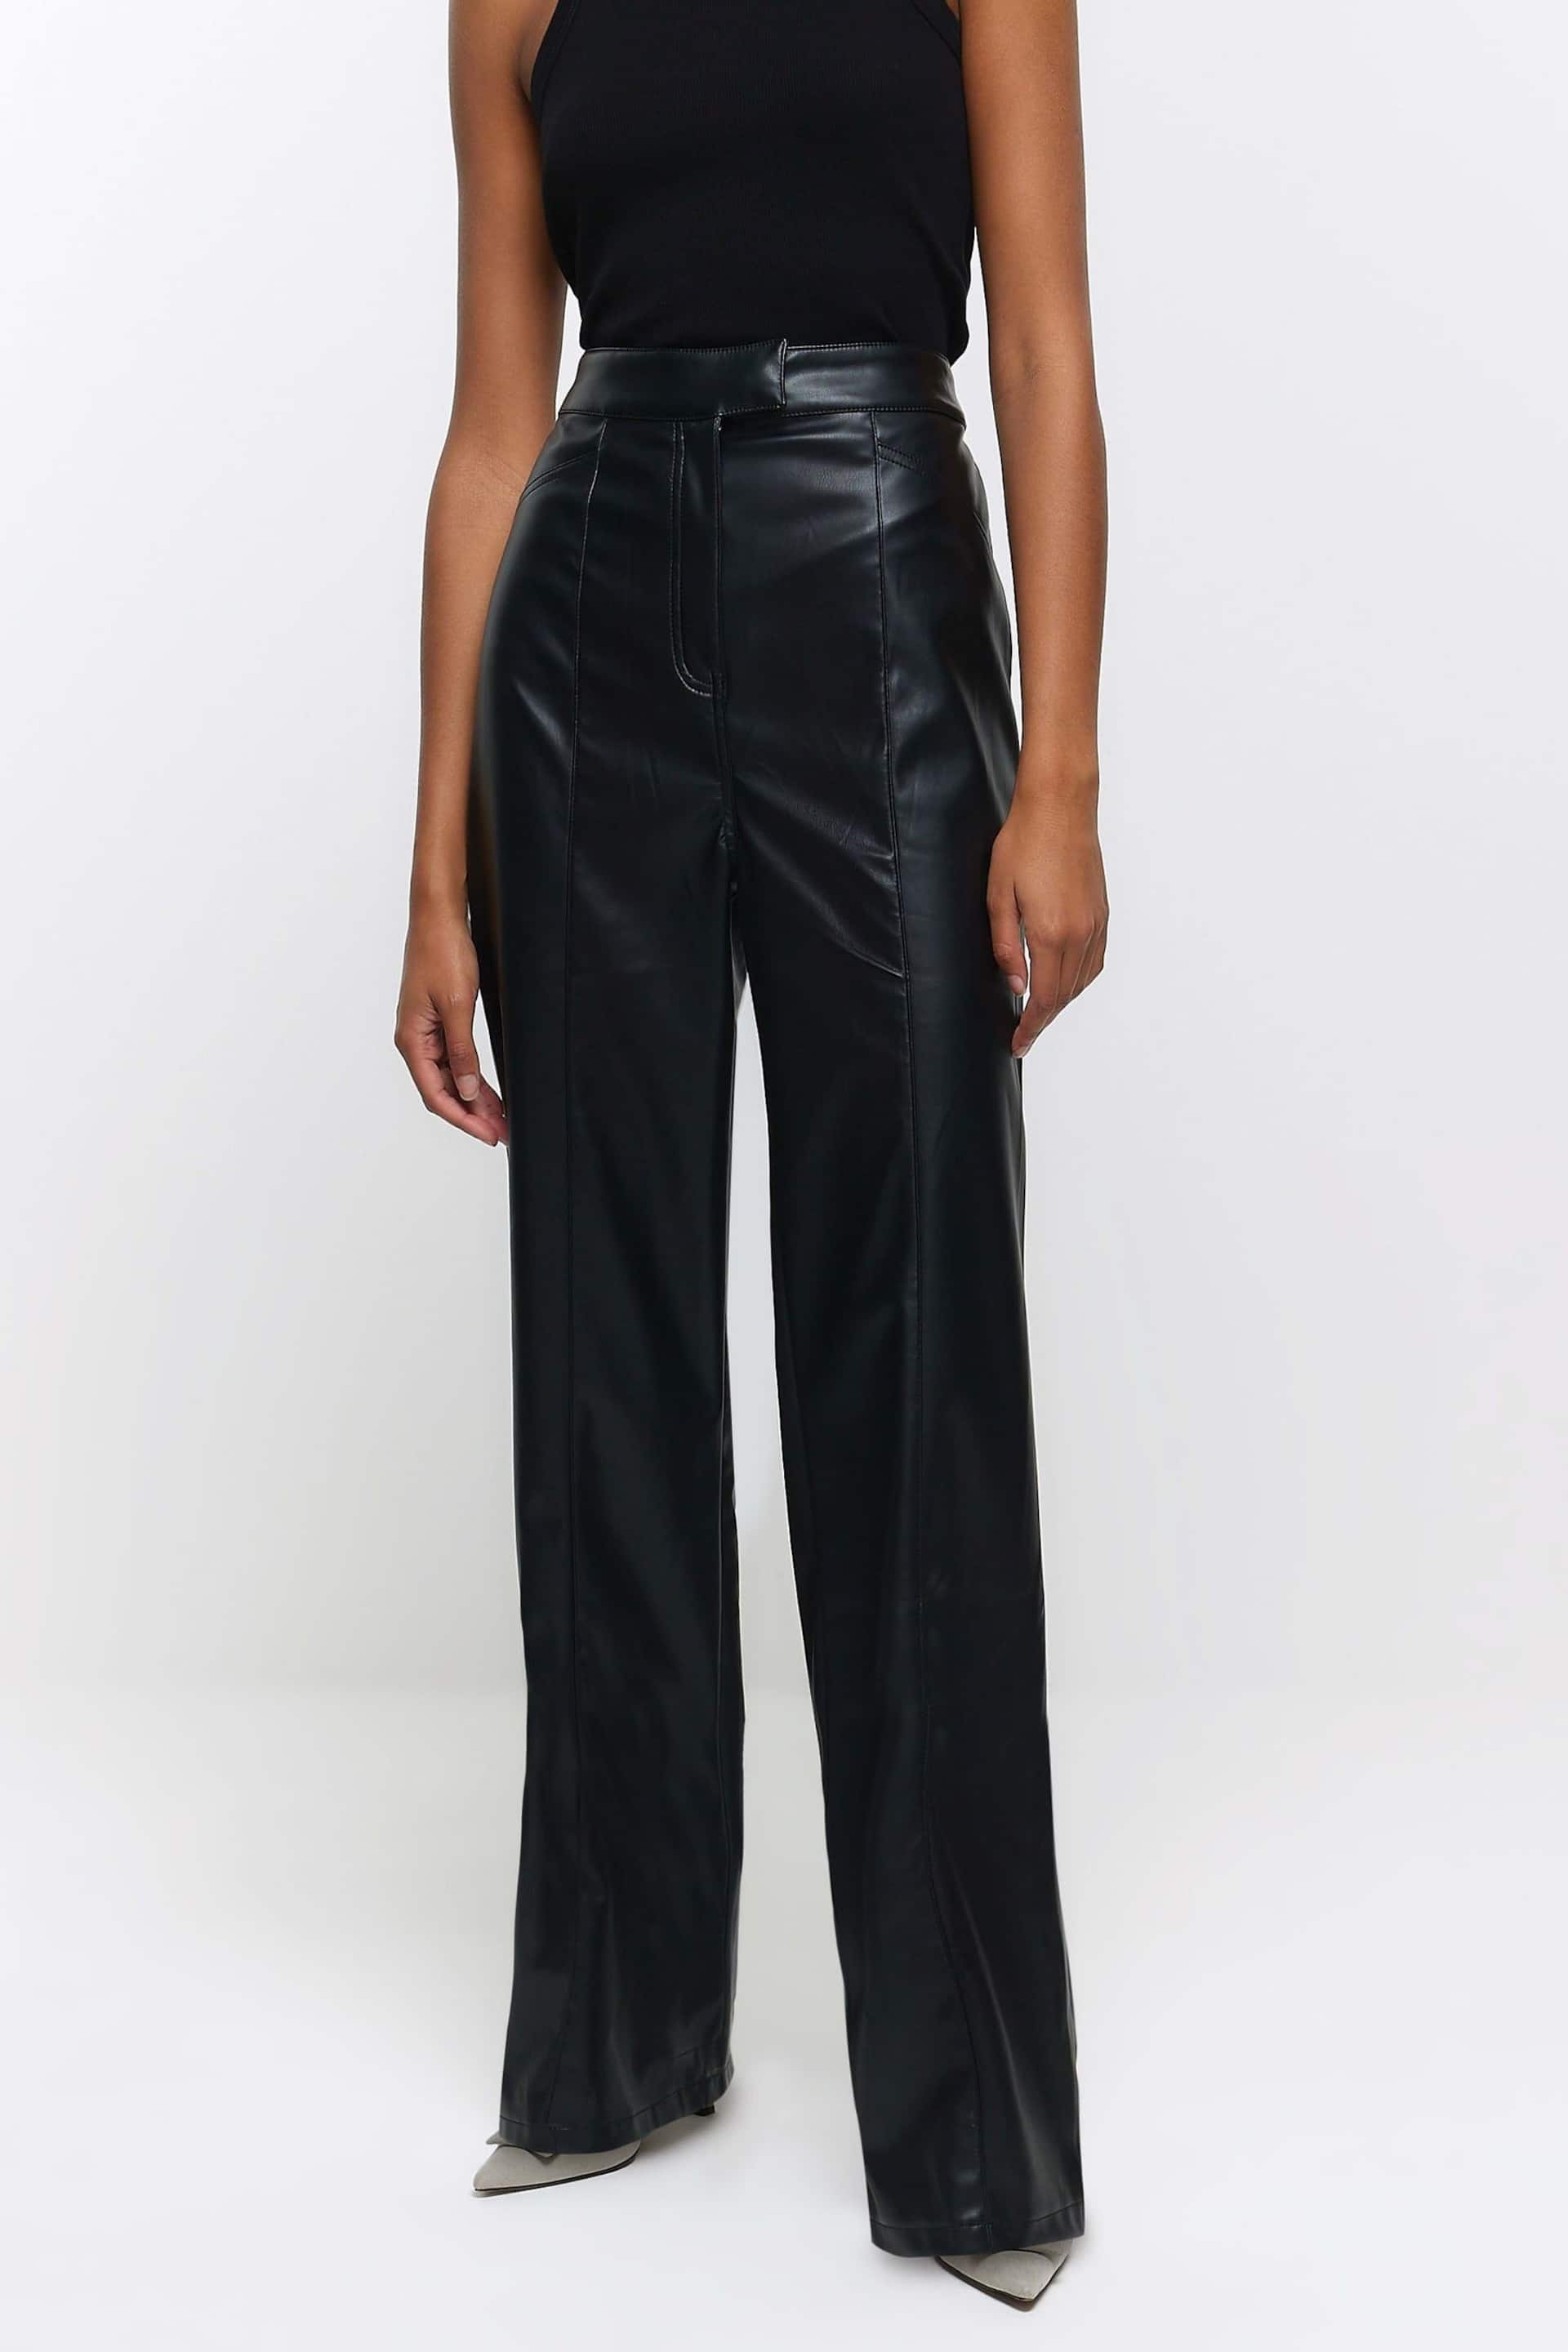 River Island Black High Rise Straight Leg Coated Trousers - Image 1 of 5